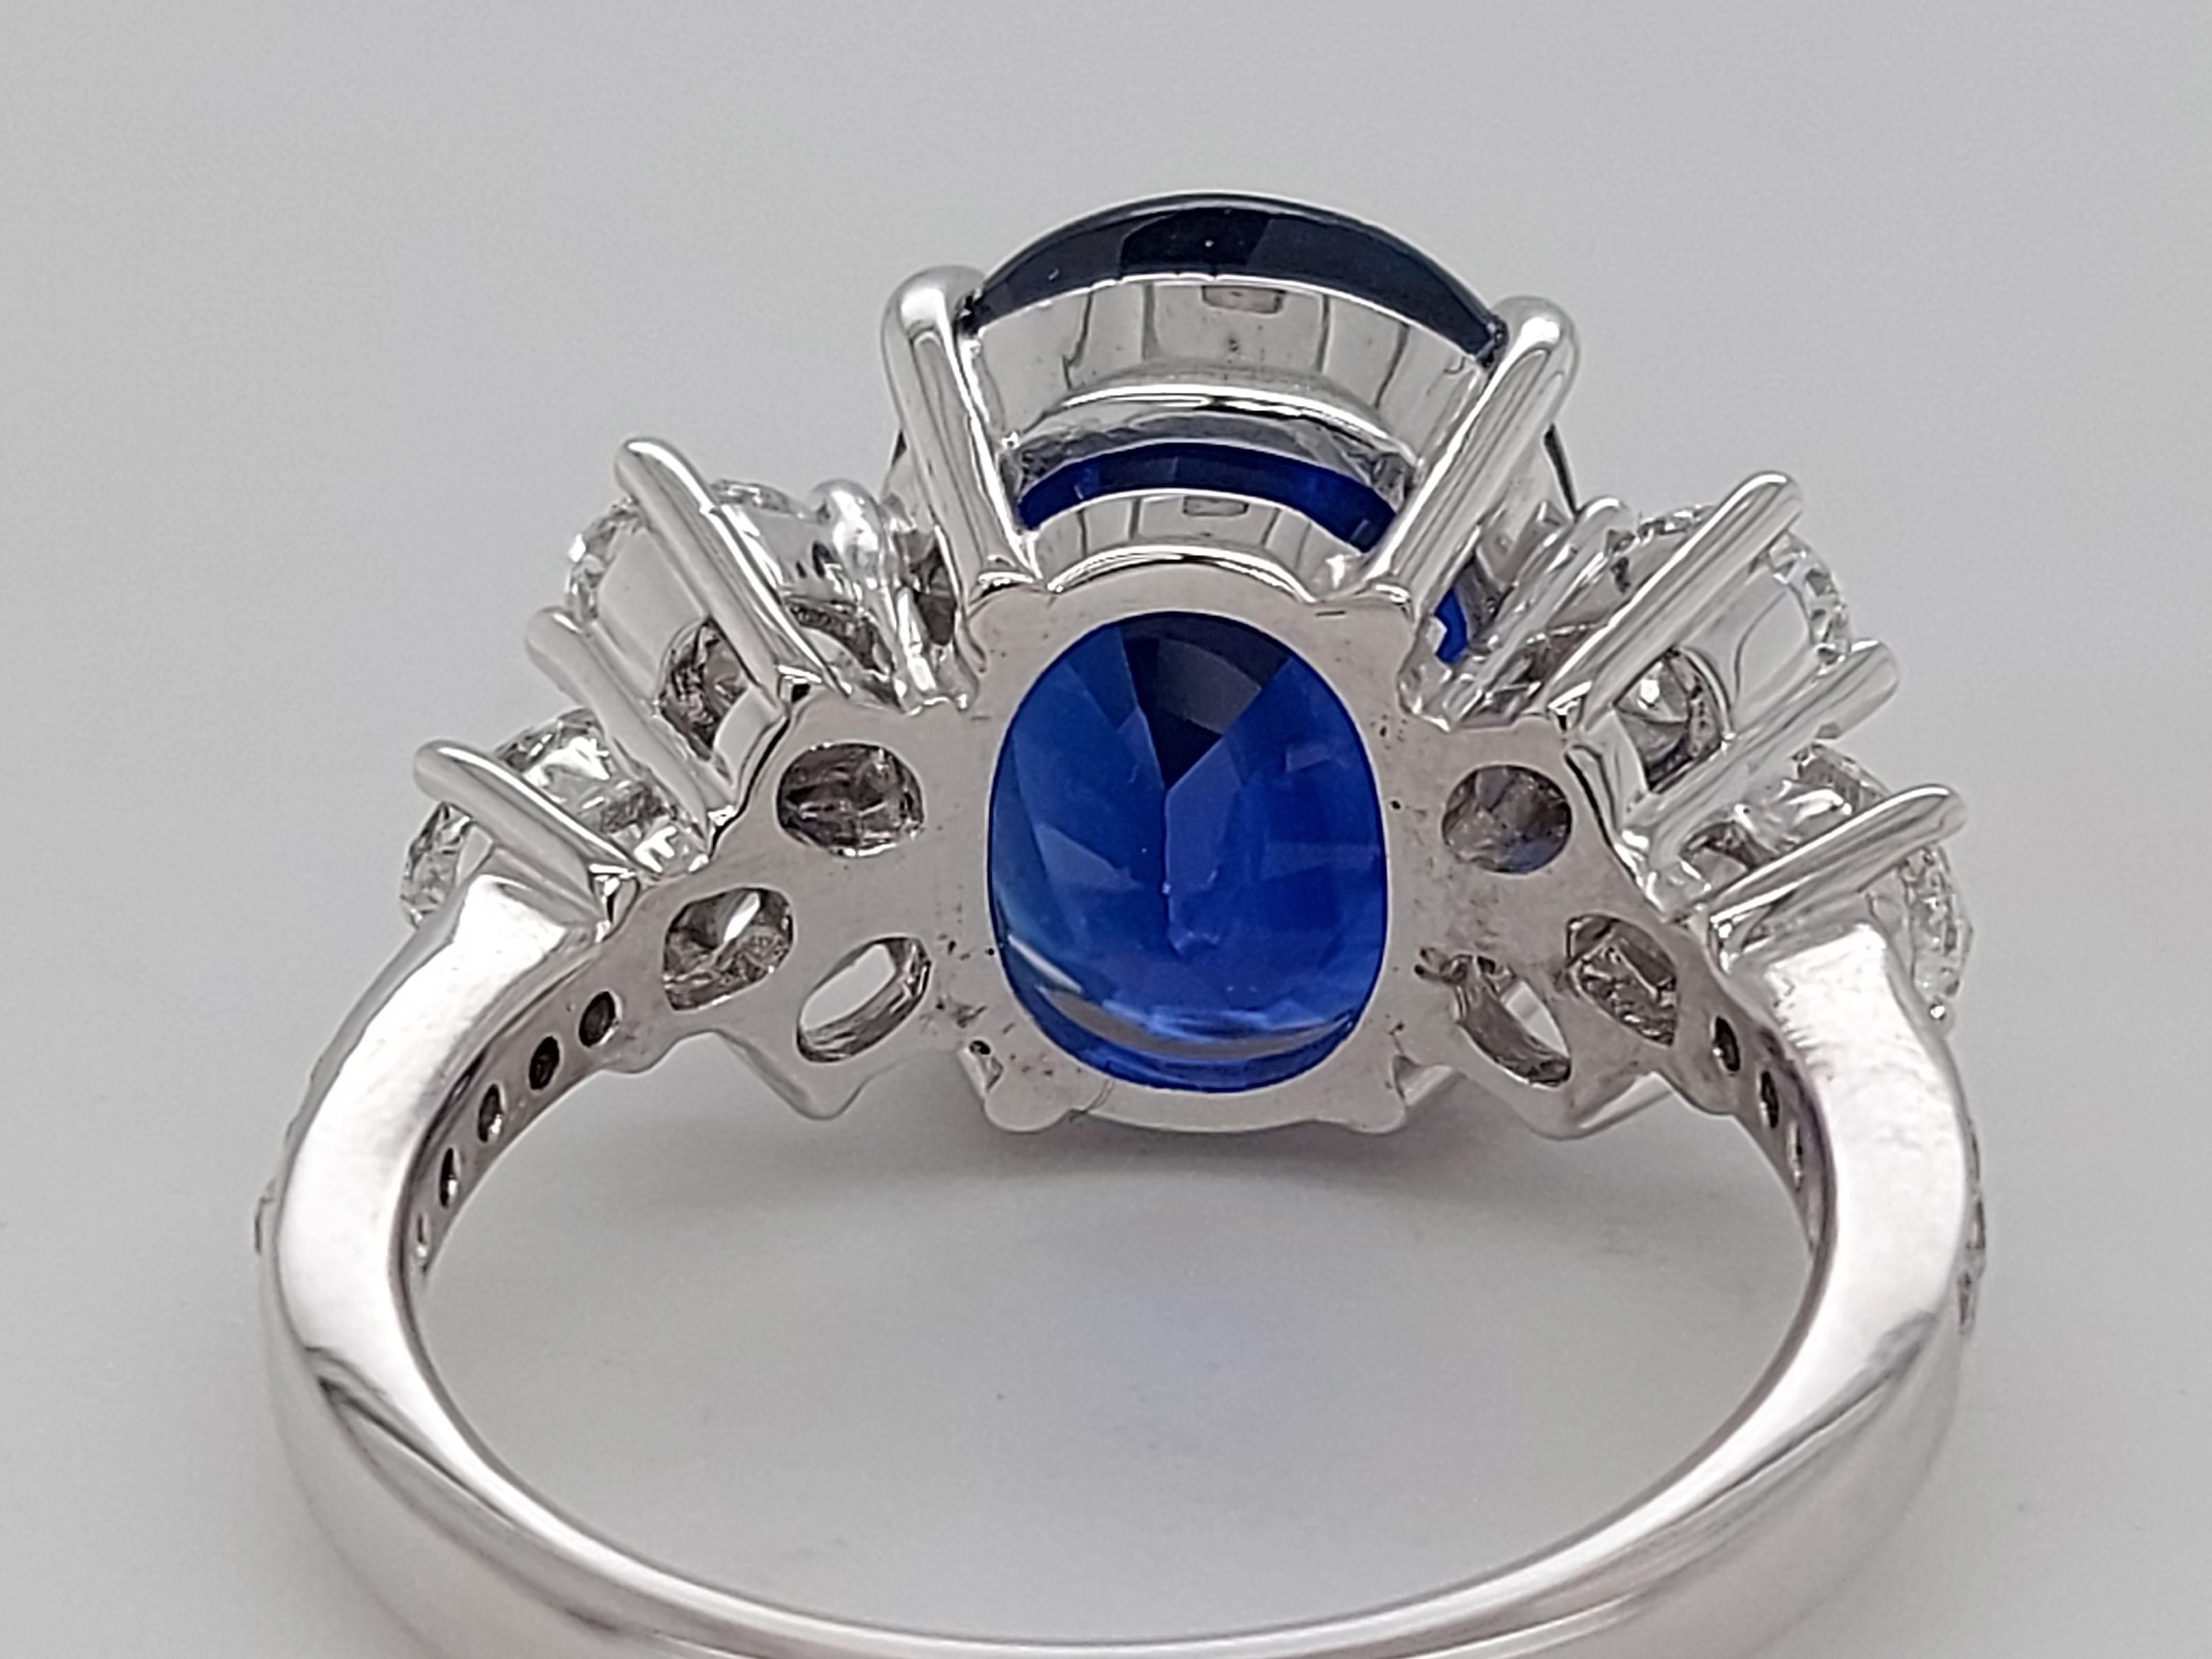 18 Karat White Gold Ring Set with a 7 Carat Sapphire and Diamonds 8